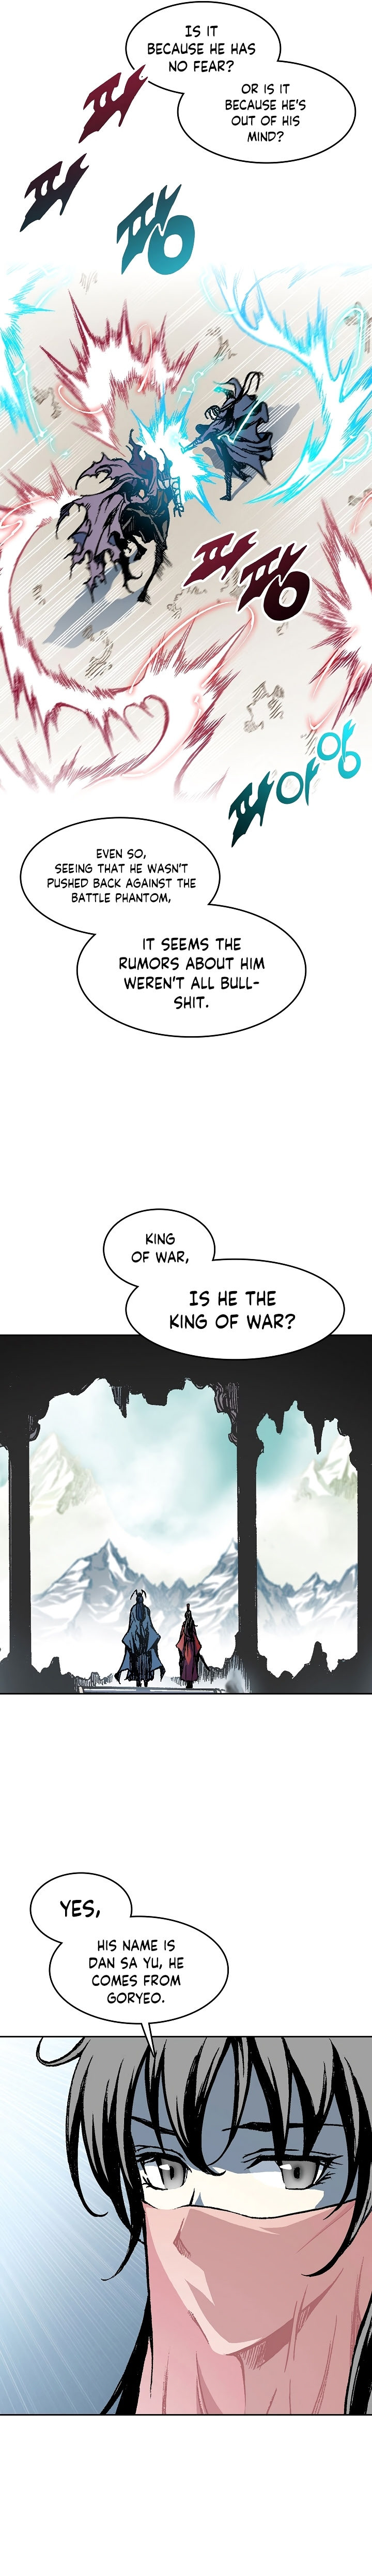 Memoir Of The God Of War - Chapter 98 Page 2